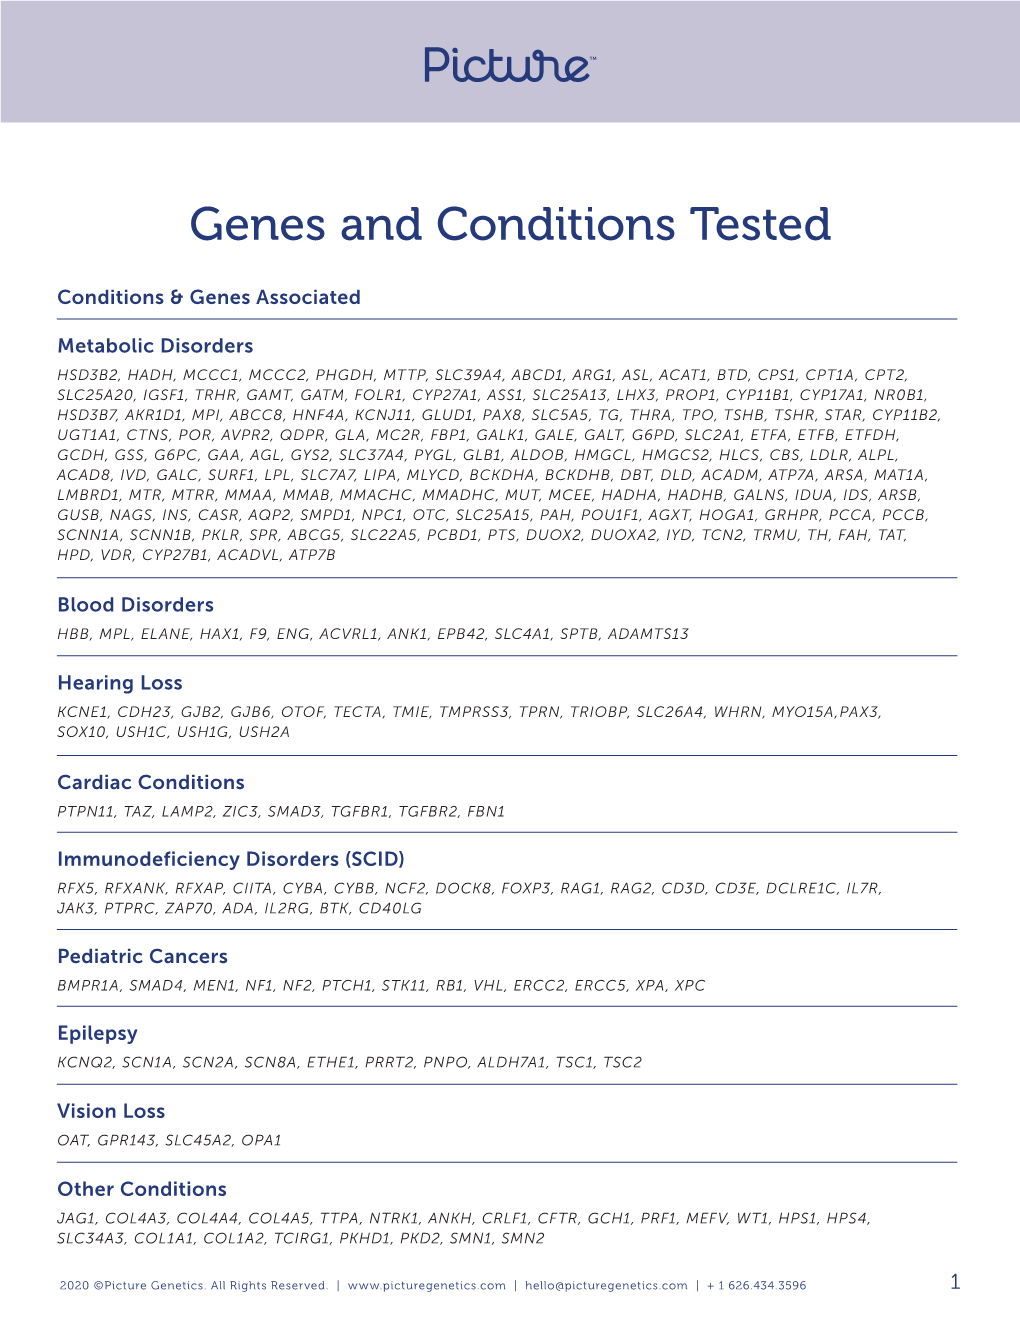 Genes and Conditions Tested